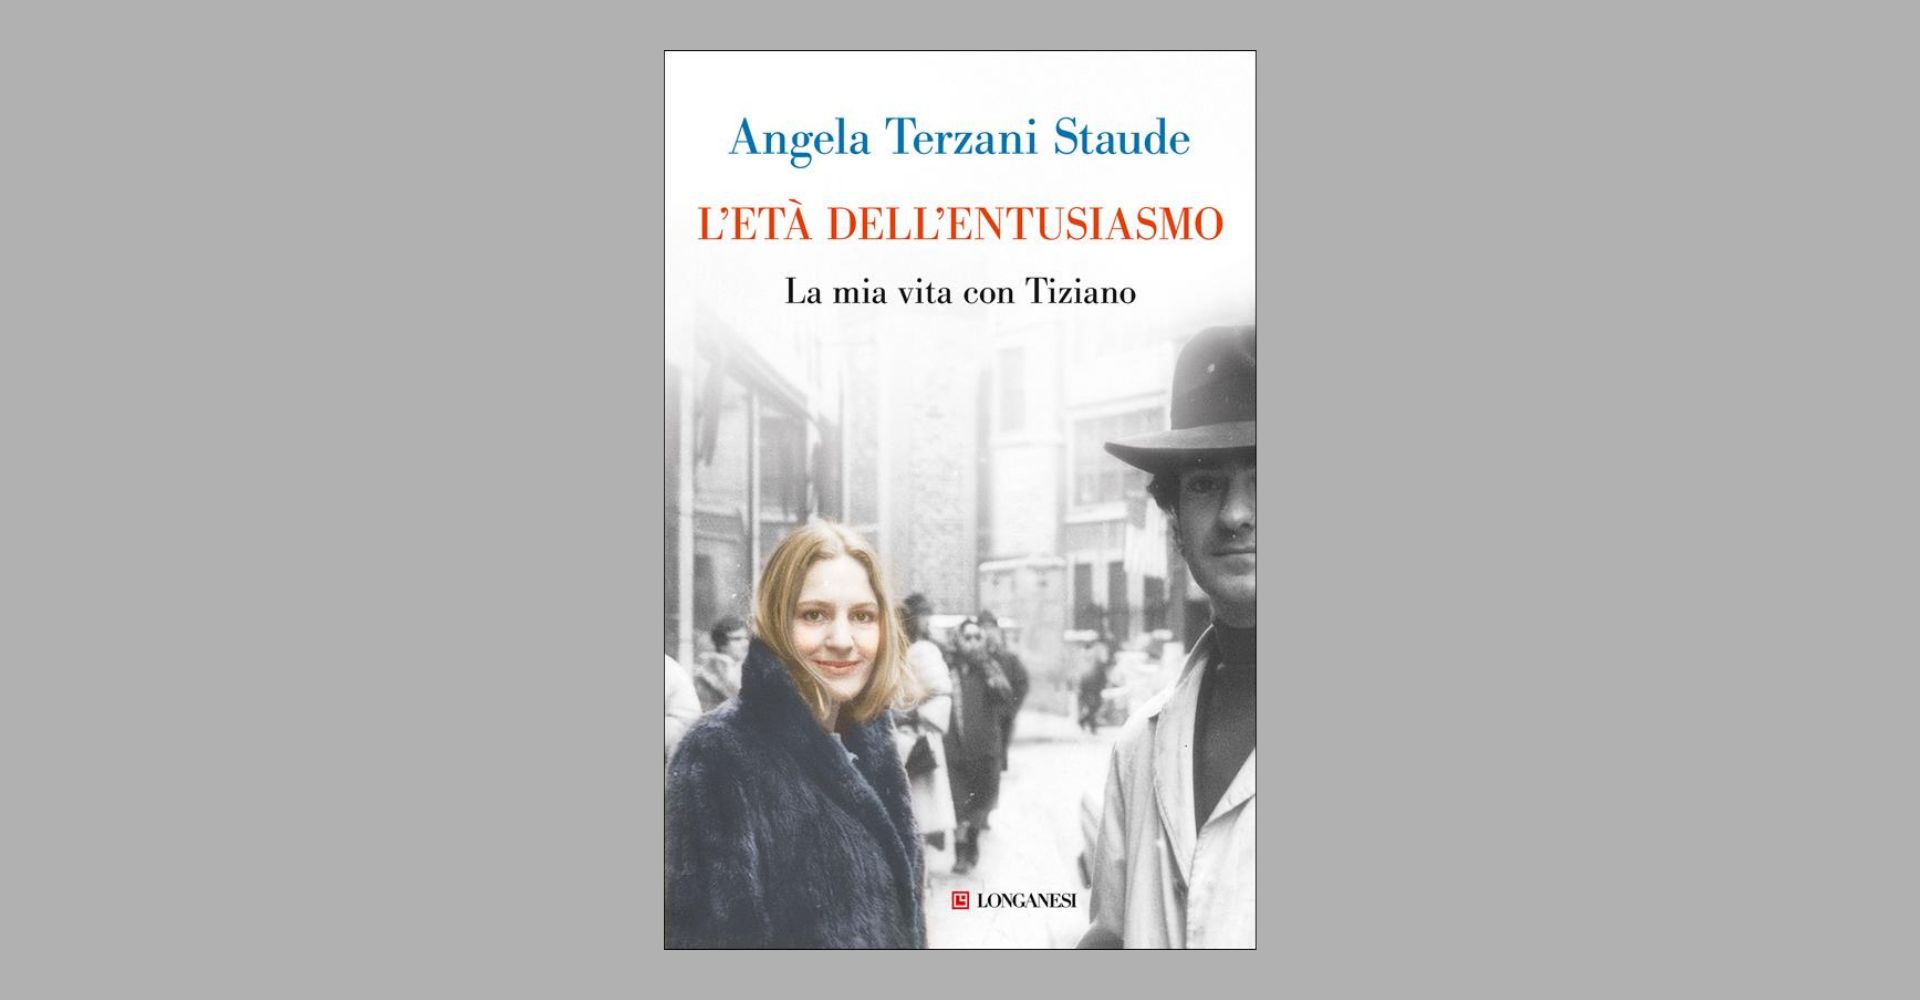 “My life with Titian”: between the memoirs and diaries of Angela Terzani Staude